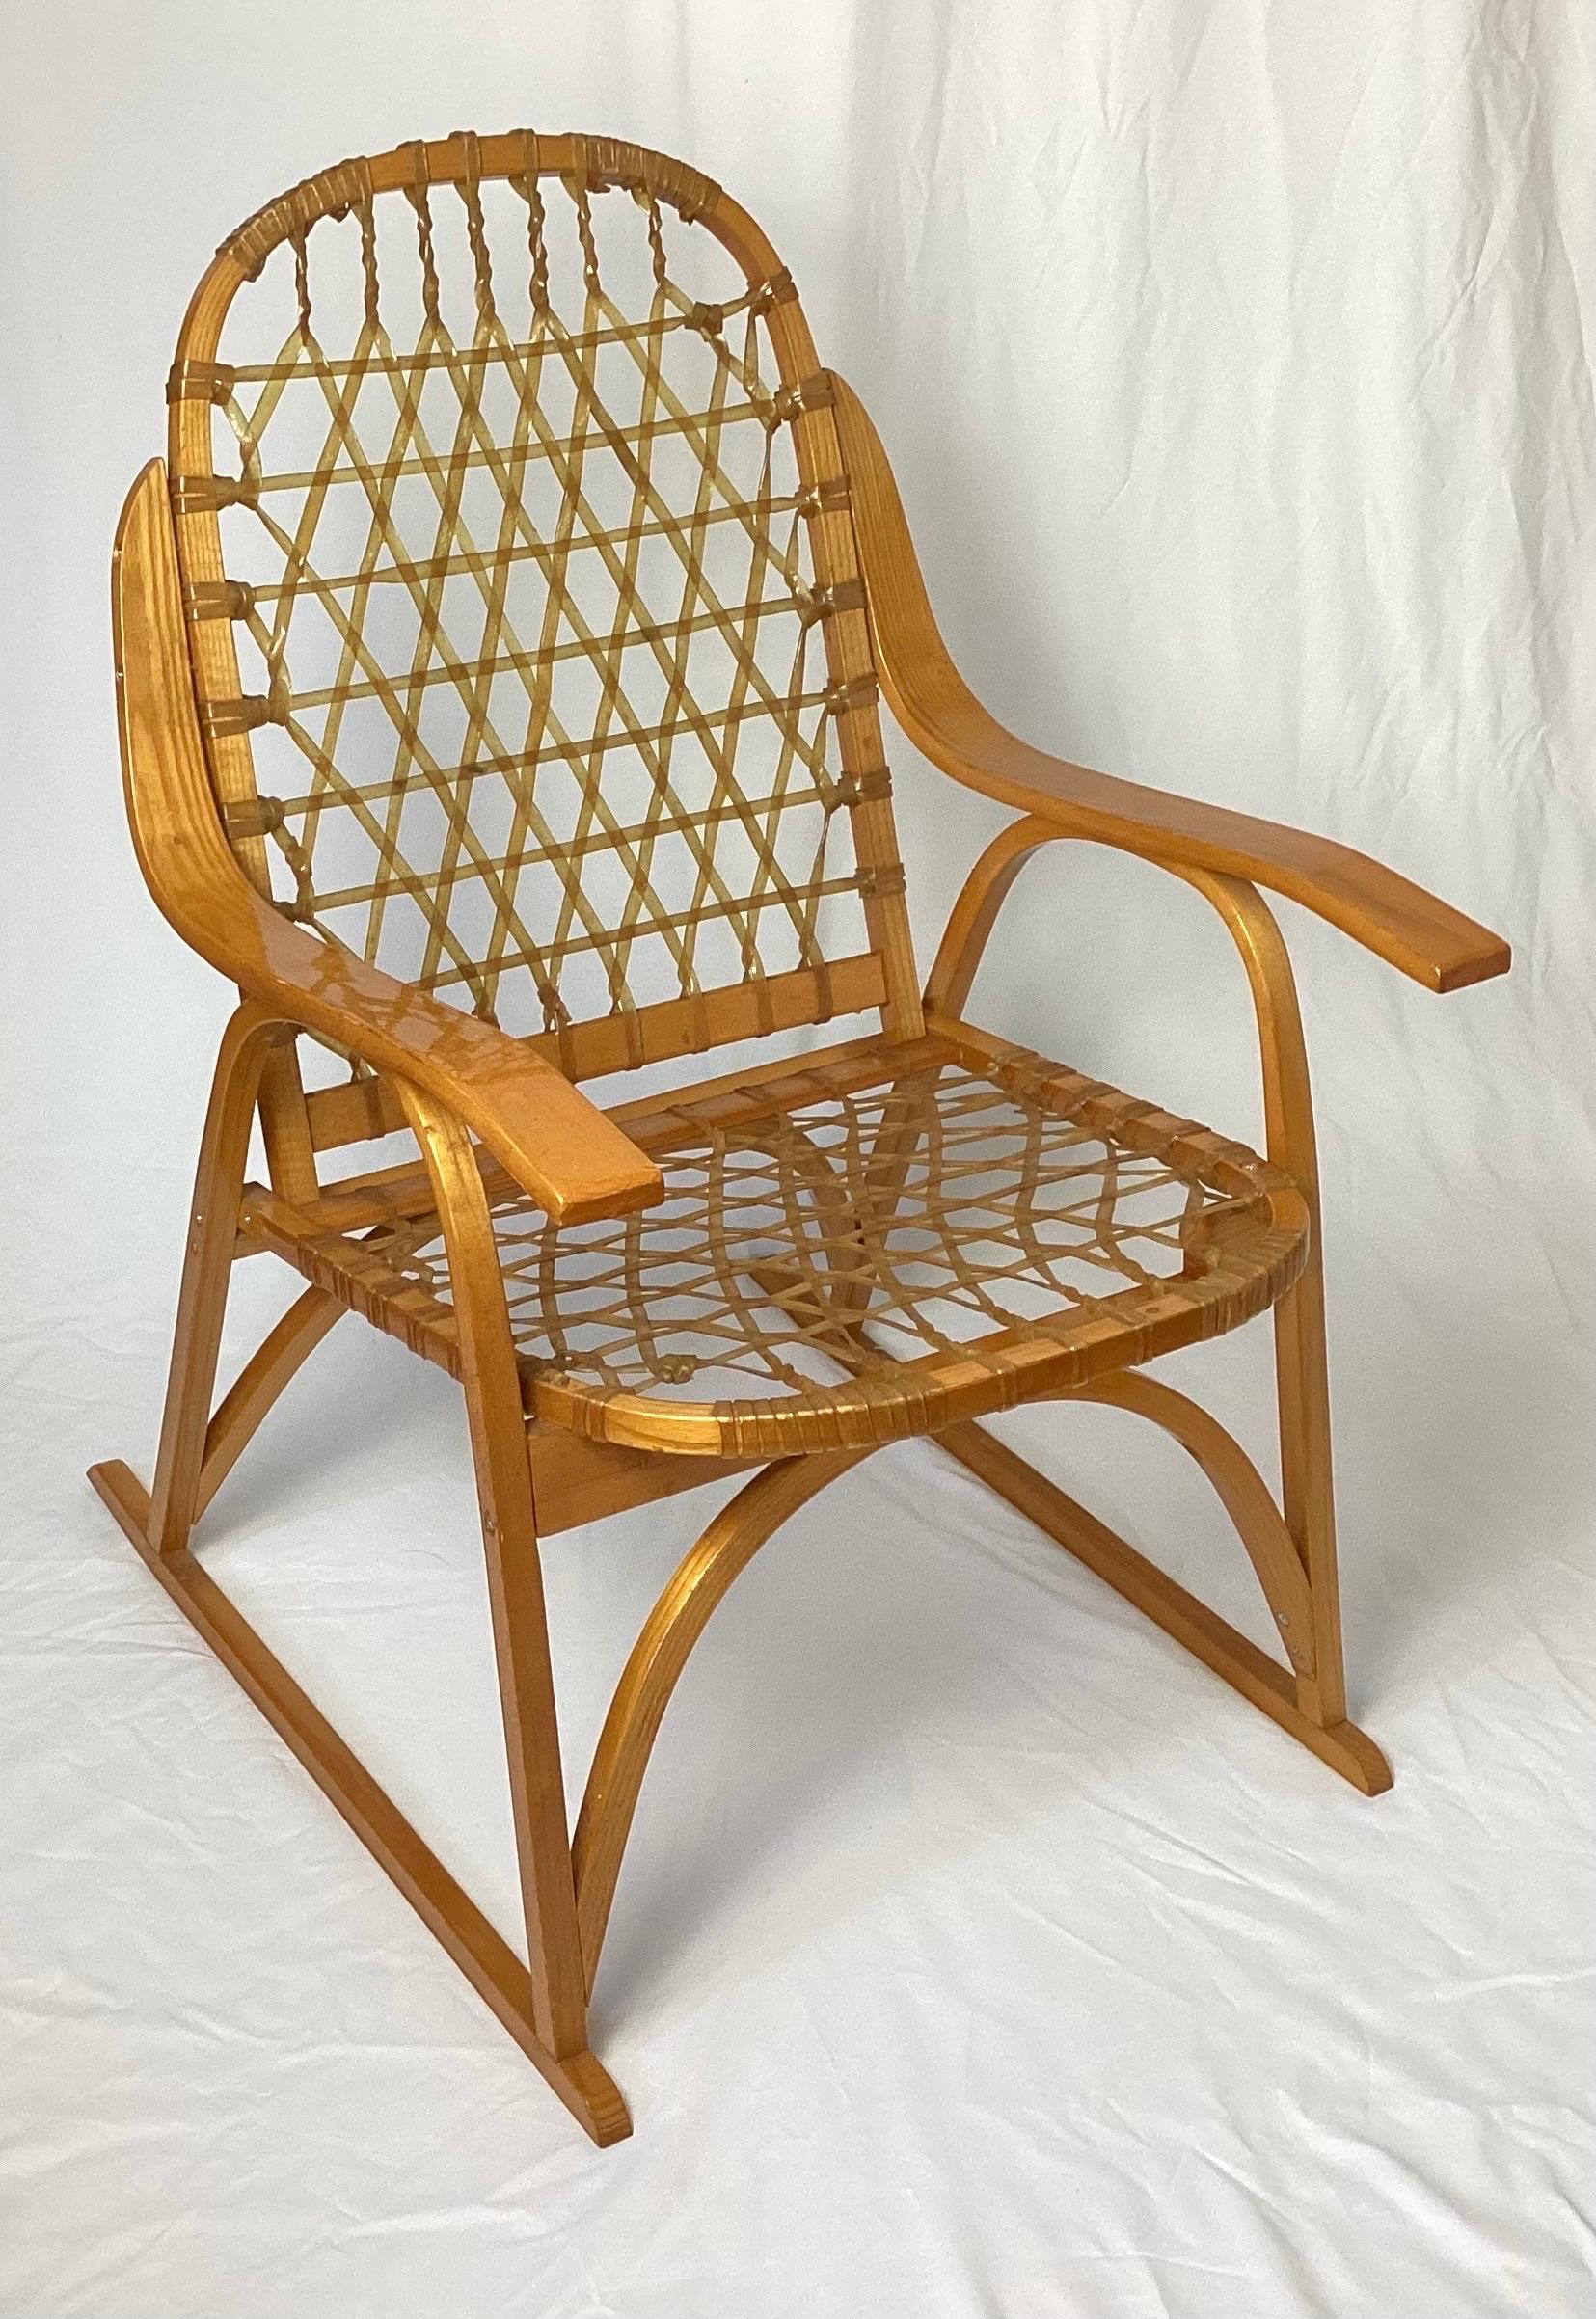 Vintage Snowshoe Arm Chairs by SnoCraft, Norway Maine. Great look for your cabin or mountain home. Excellent condition. Check our other listings for more SnoCraft furniture.